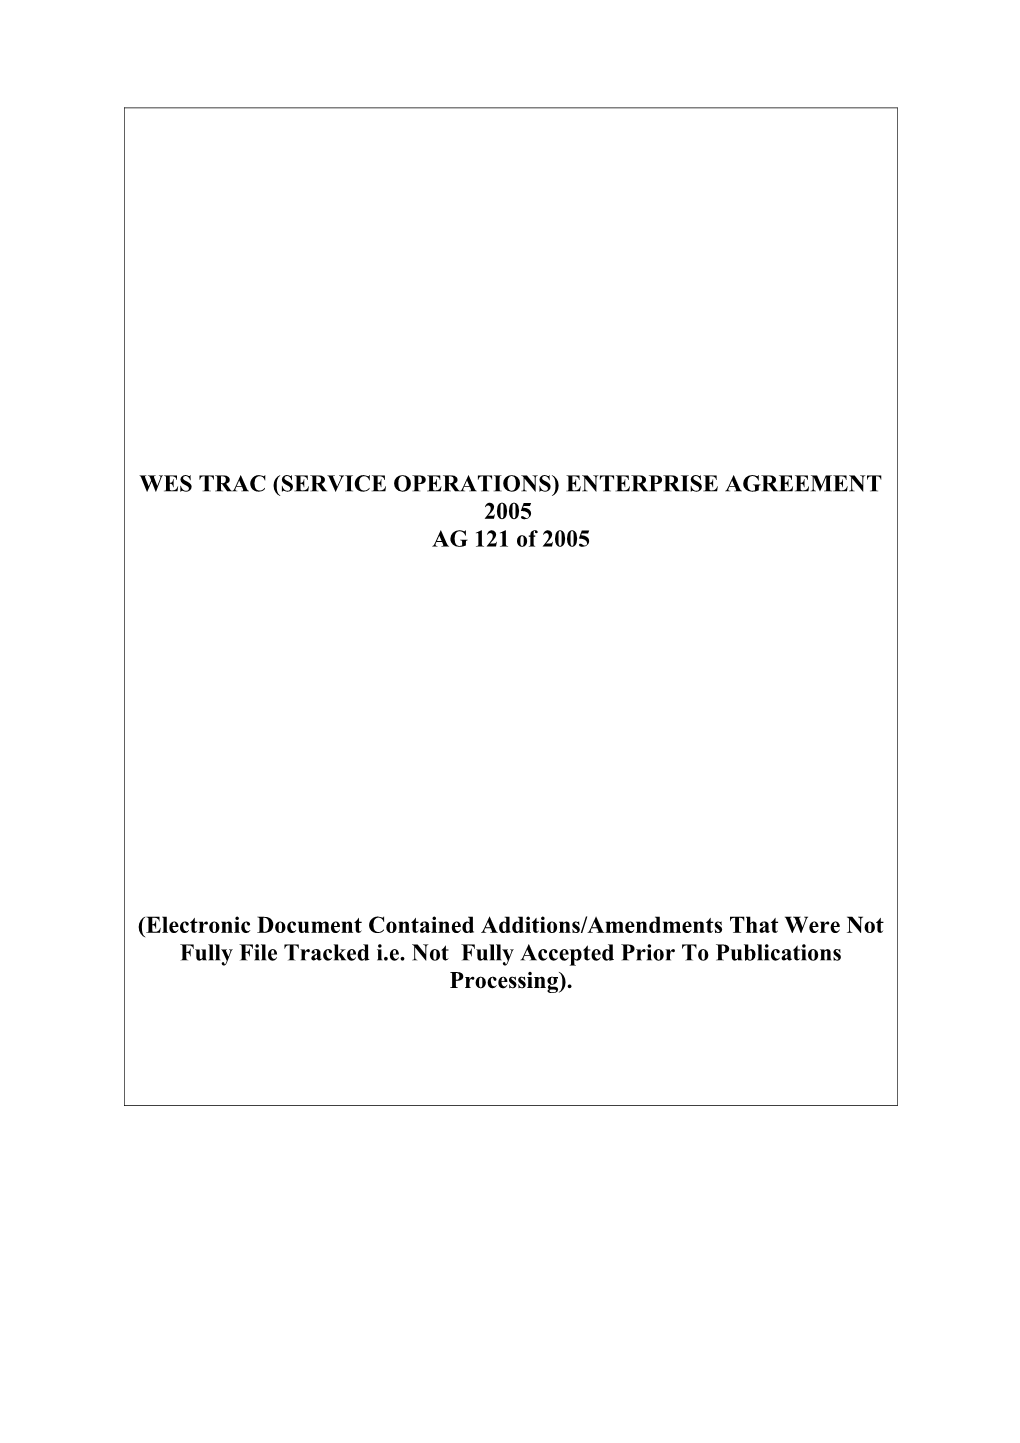 Wes Trac (Service Operations) Enterprise Agreement 2005 02386